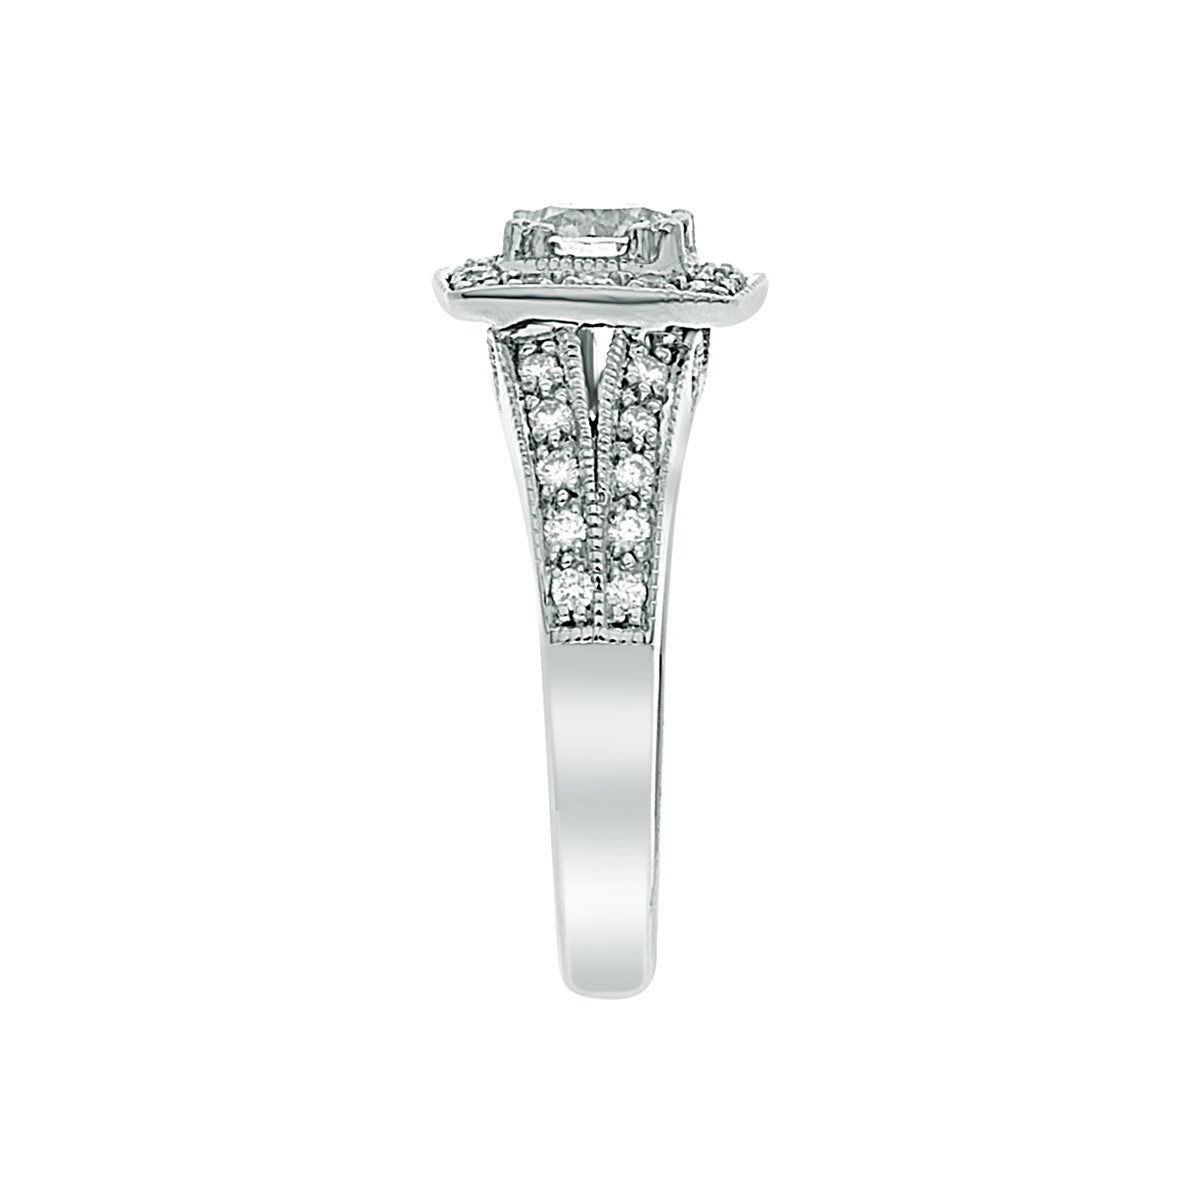 Halo Engagement Ring with Milgrain in white gold in a side view